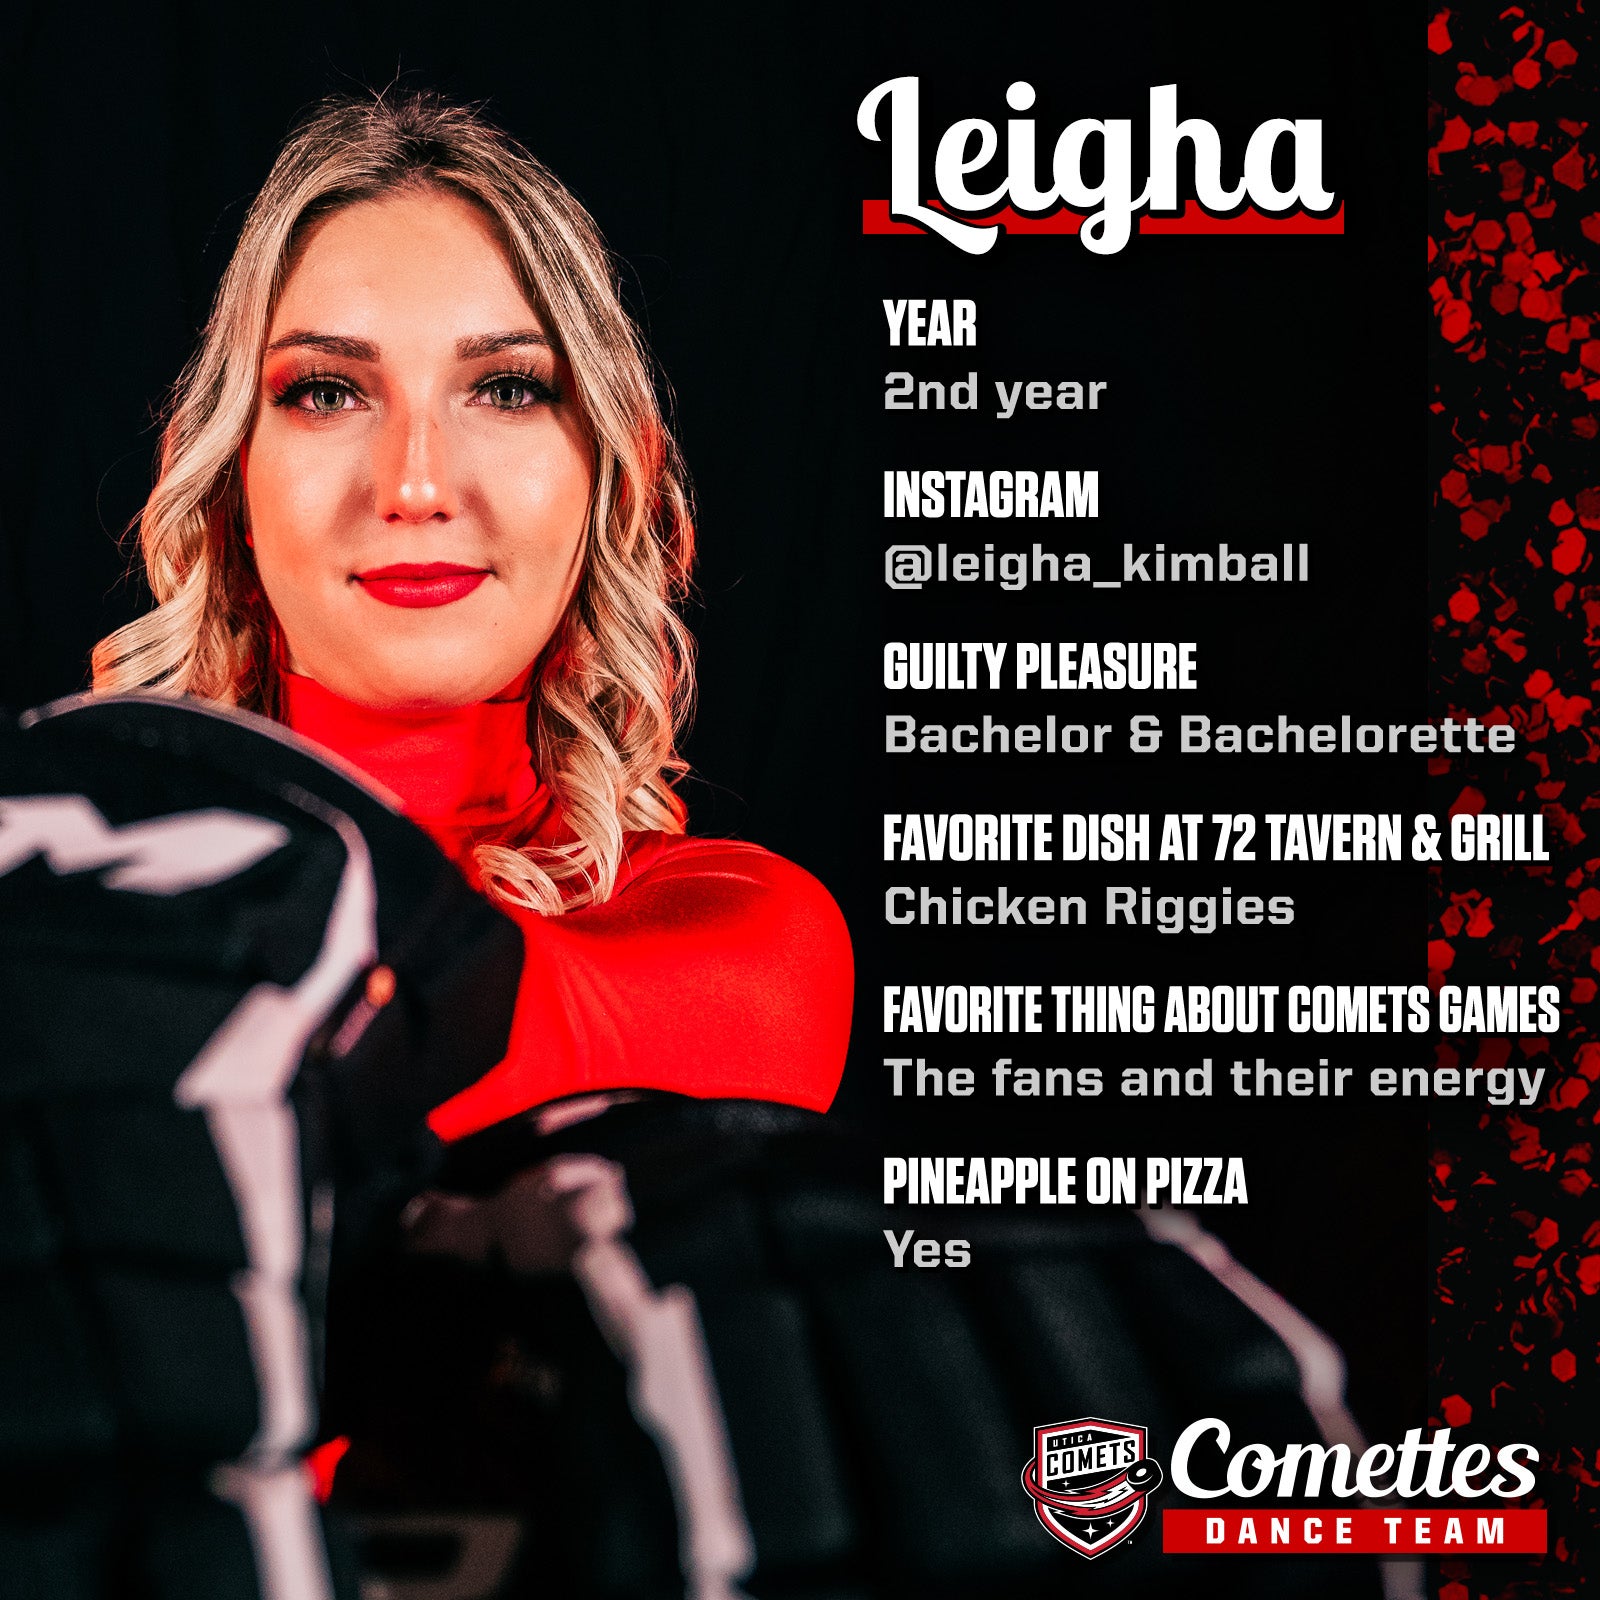 Meet The Comettes_Template_Leigha copy.jpg